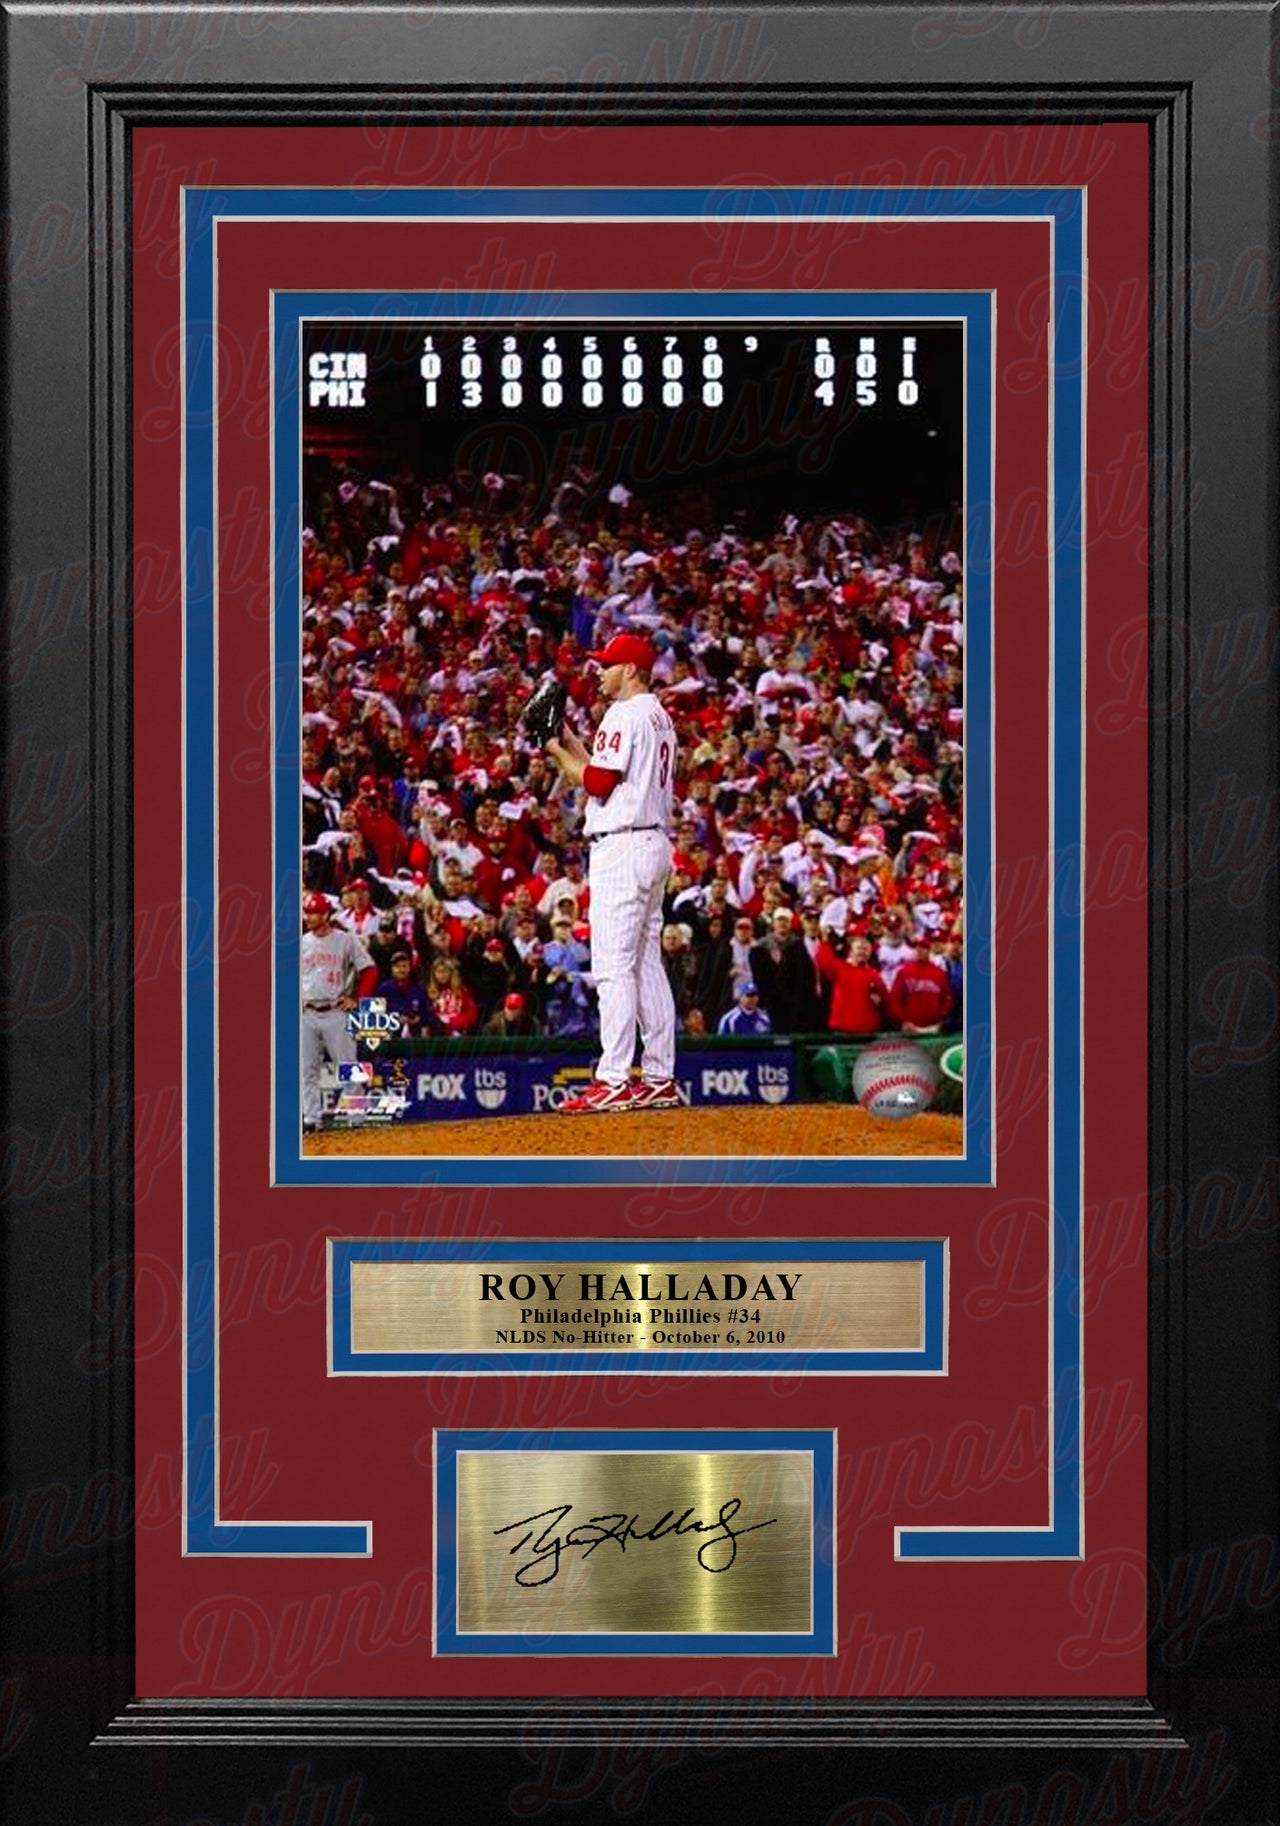 Chase Utley Swinging at the Plate Philadelphia Phillies 8x10 Framed Photo  with Engraved Autograph - Dynasty Sports & Framing